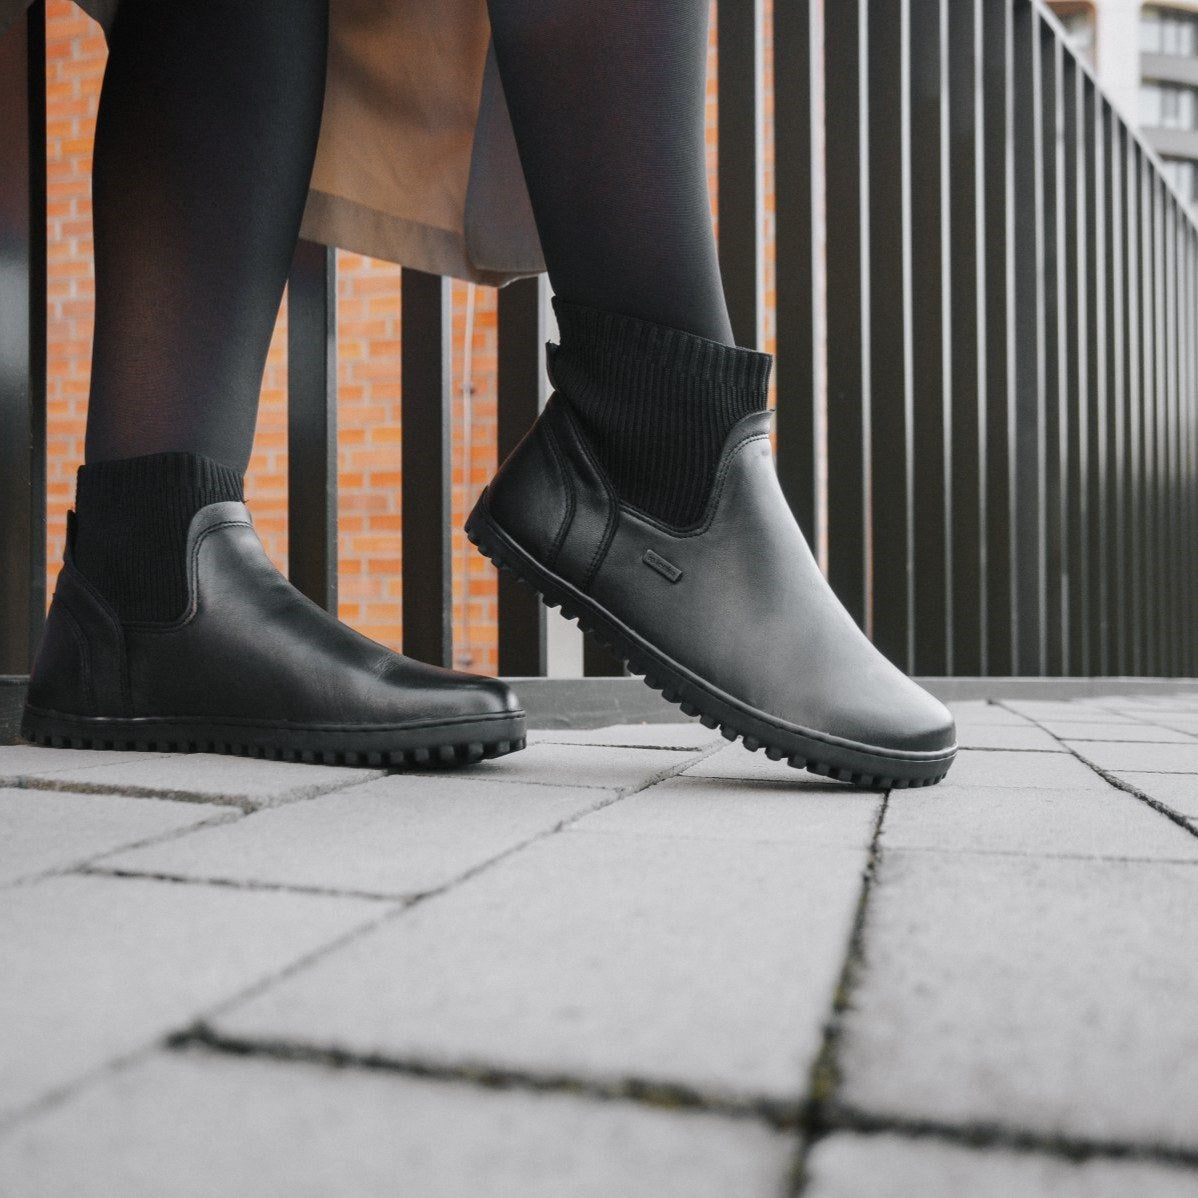 A photo of Be Lenka Mojo boots in black. Boots are made from smooth black leather and a knit opening hugging around the ankle. Both boots are shown from the right on a woman's feet. The woman is wearing black stockings and is walking on a paved sidewalk with a black metal fence in the background #color_black